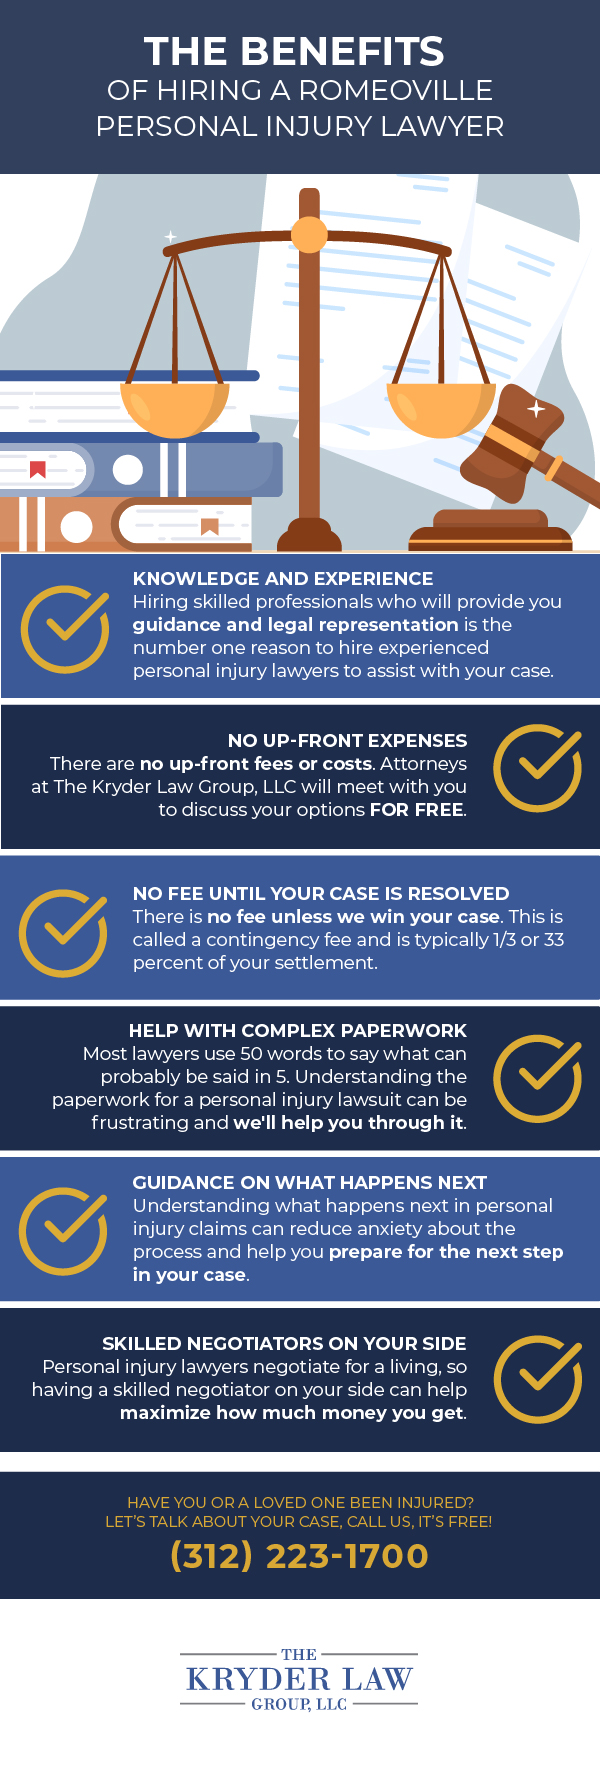 The Benefits of Hiring a Romeoville Personal Injury Lawyer Infographic